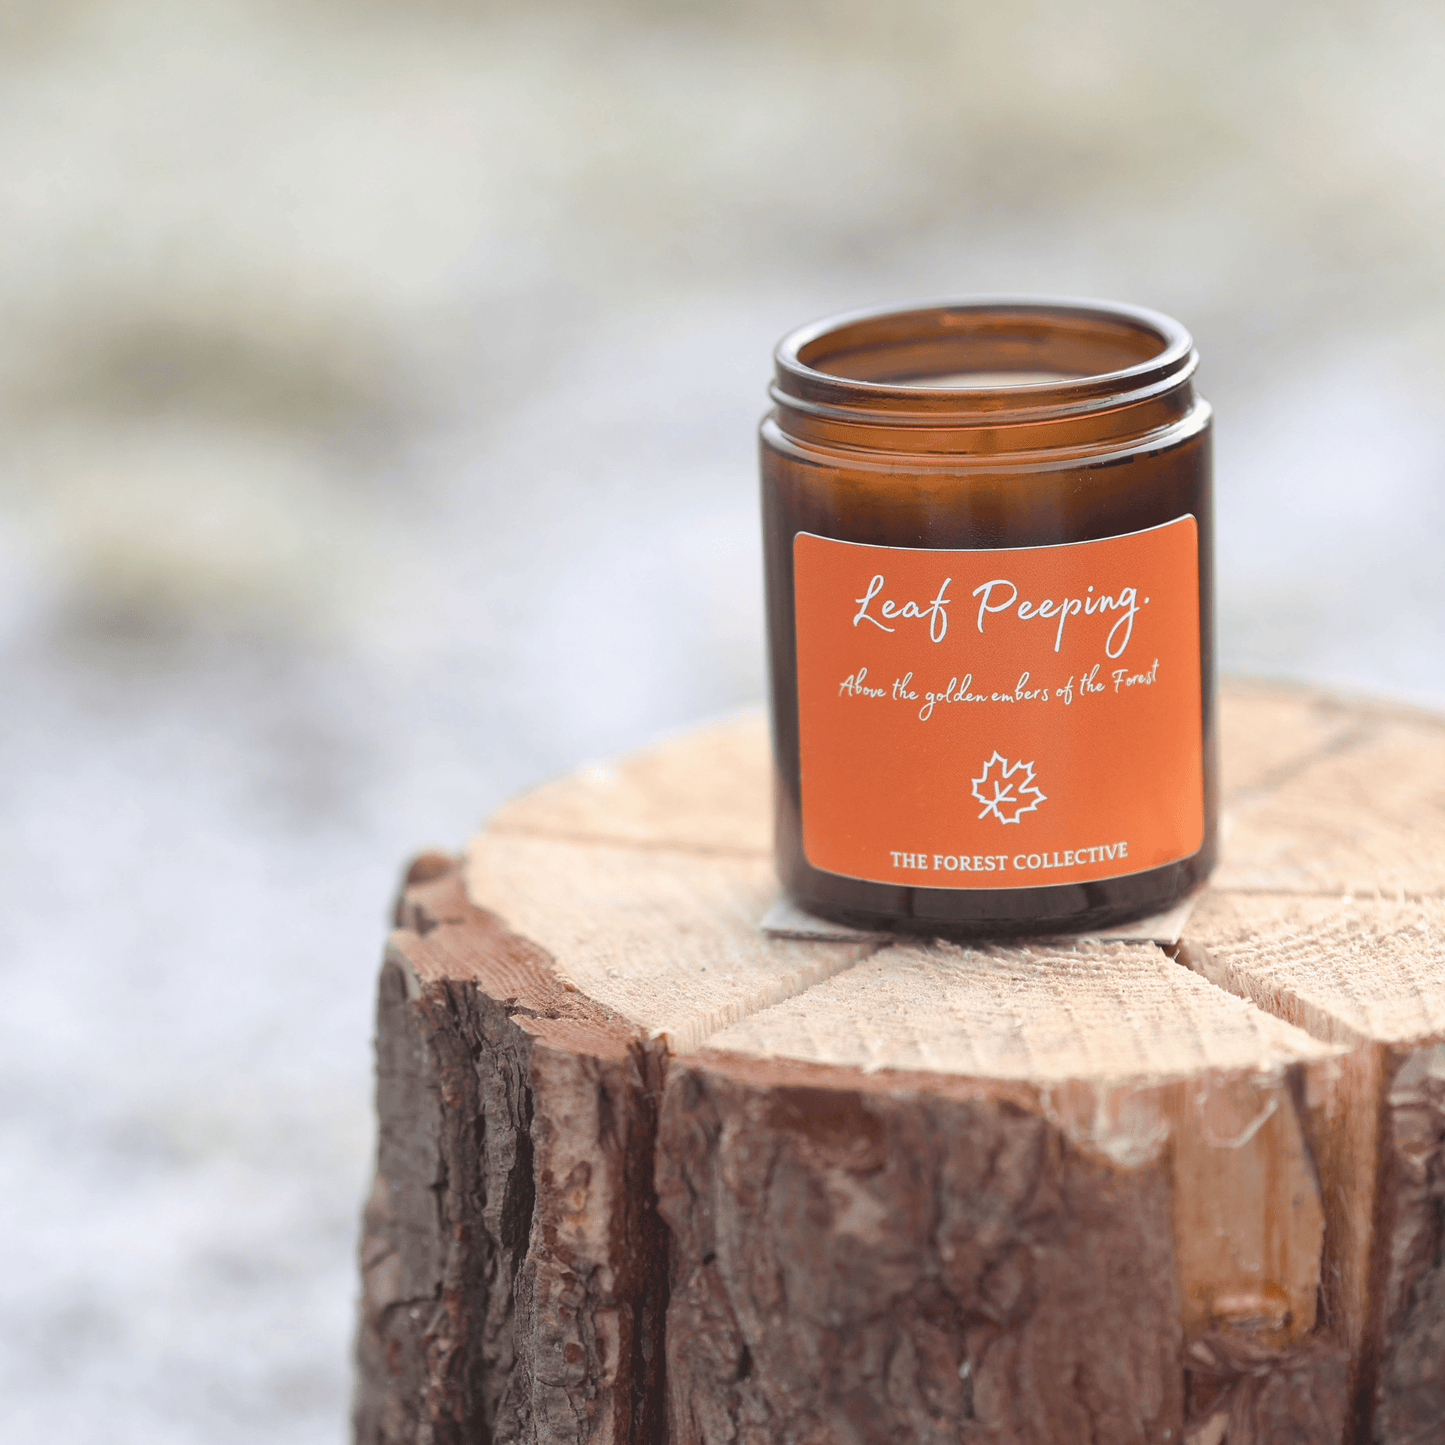 Autumn Candle | Forest of Dean Candles | Mountain Biking Forest of Dean | Wye Valley giftshop | Leaf Peeping Forest | Autumn breaks